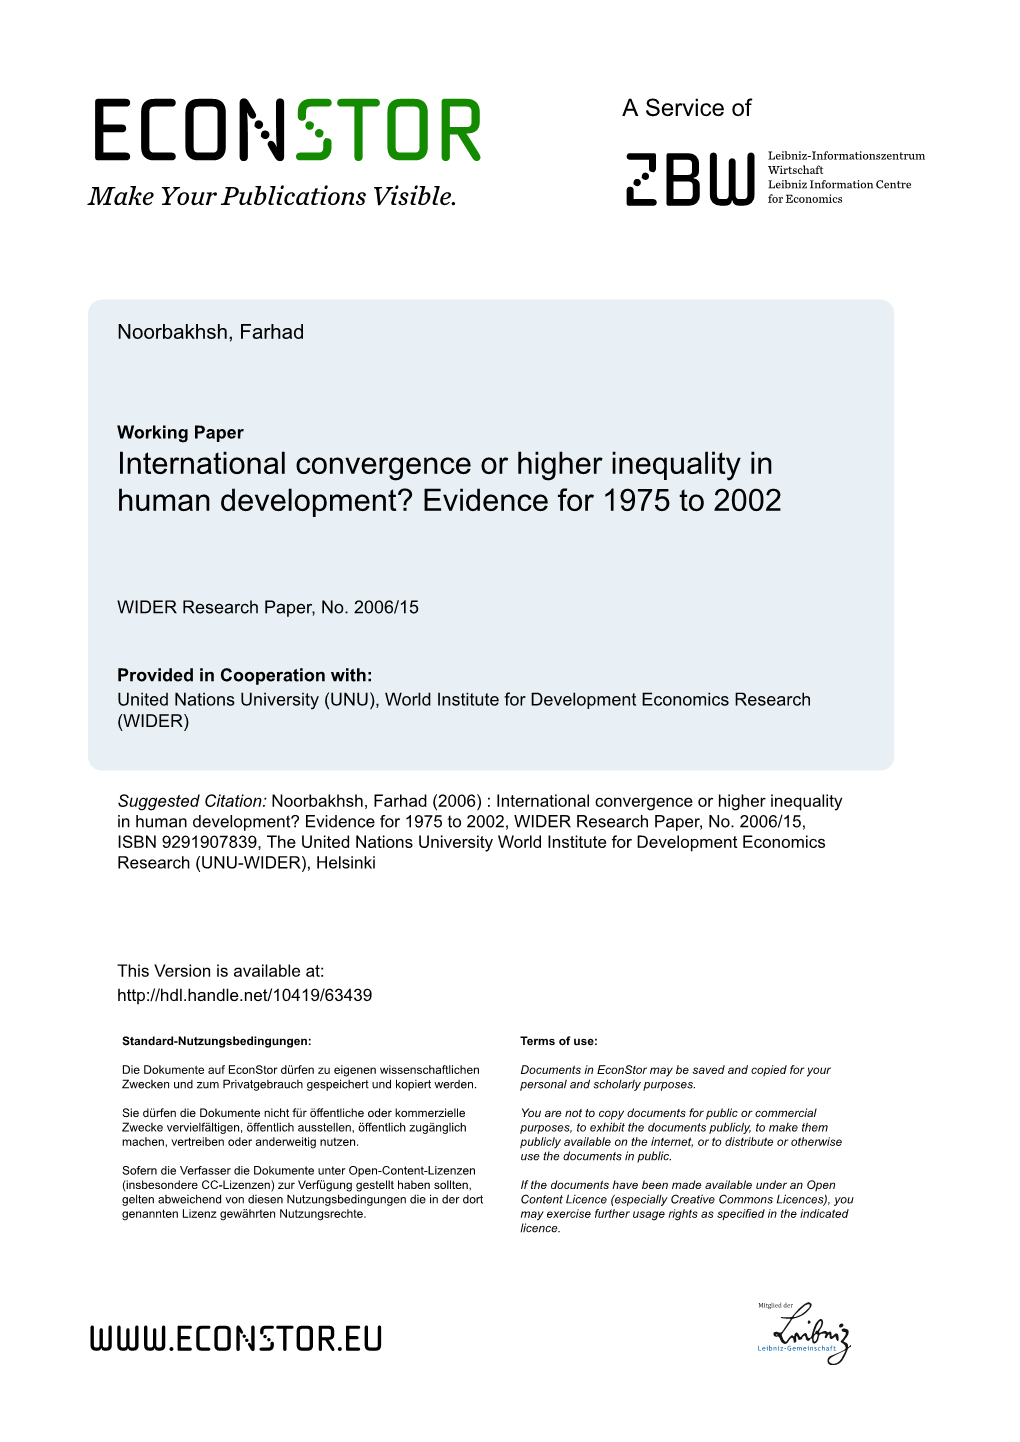 International Convergence Or Higher Inequality in Human Development? Evidence for 1975 to 2002